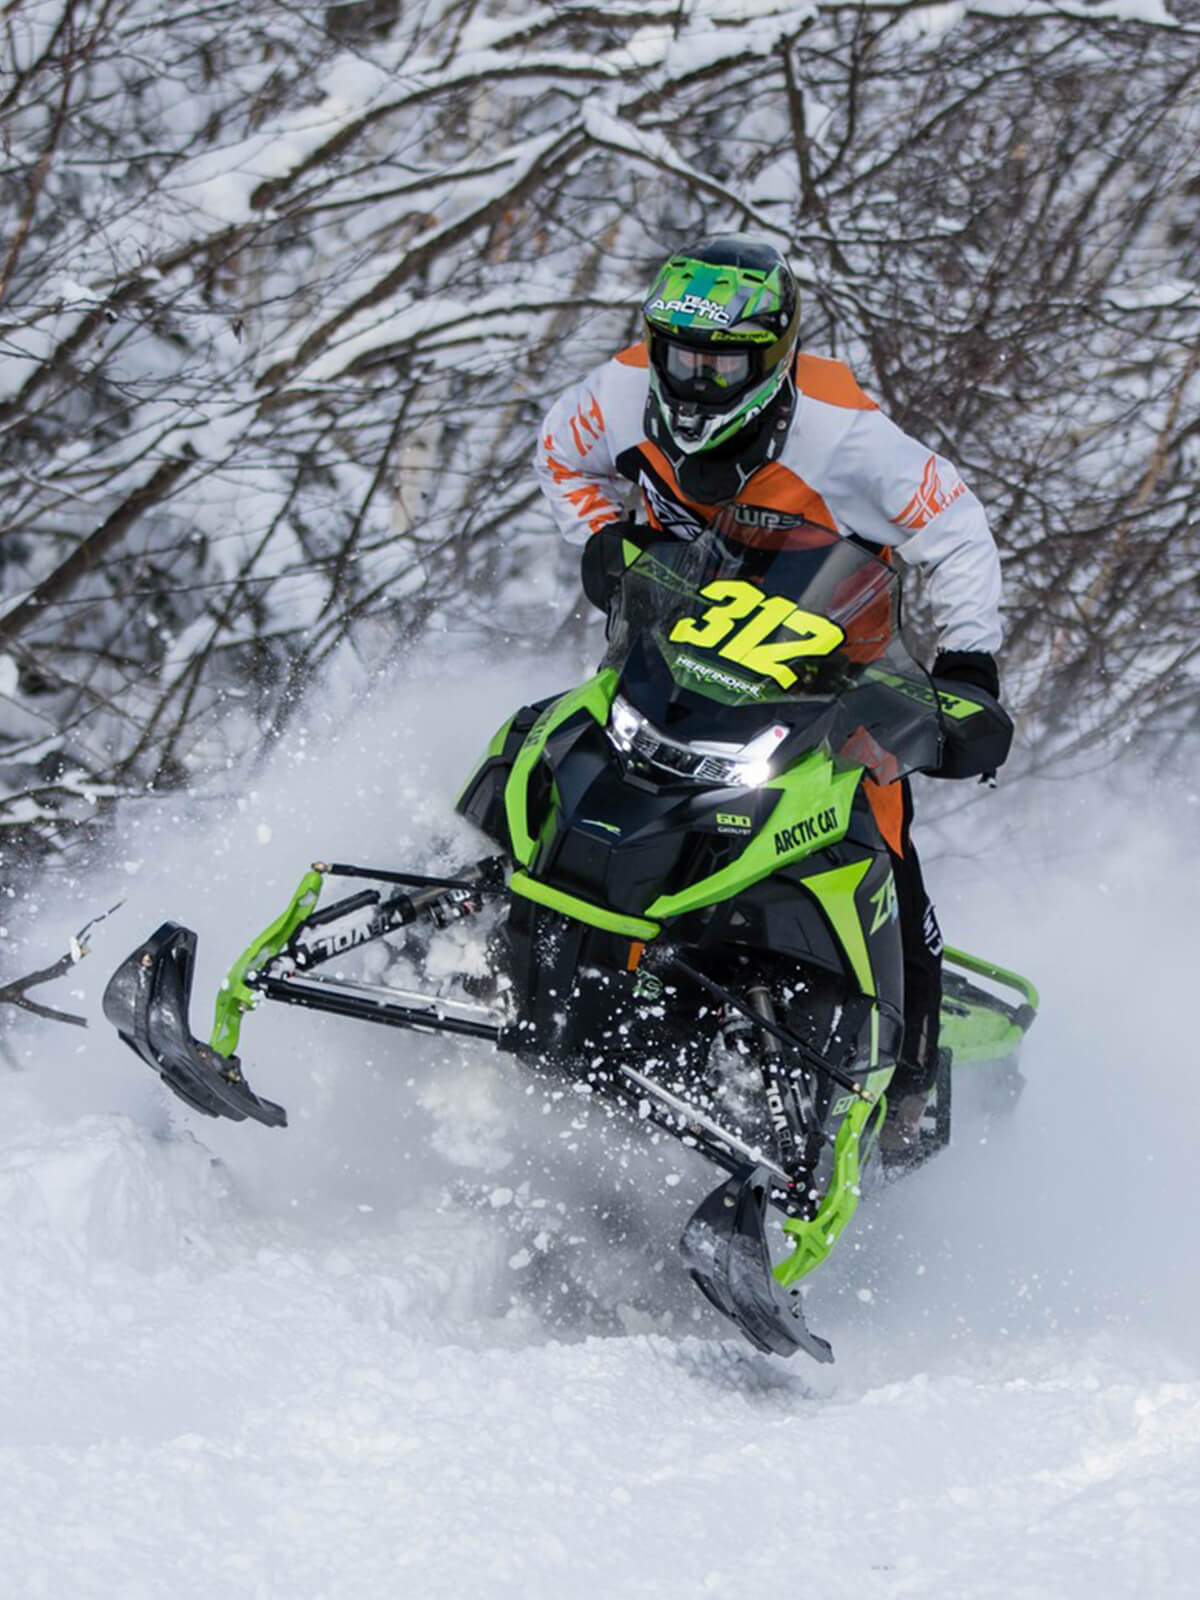 Professional cross country racer Zach Herfindahl on Arctic Cat snowmobile with C&A Pro black XCS skis